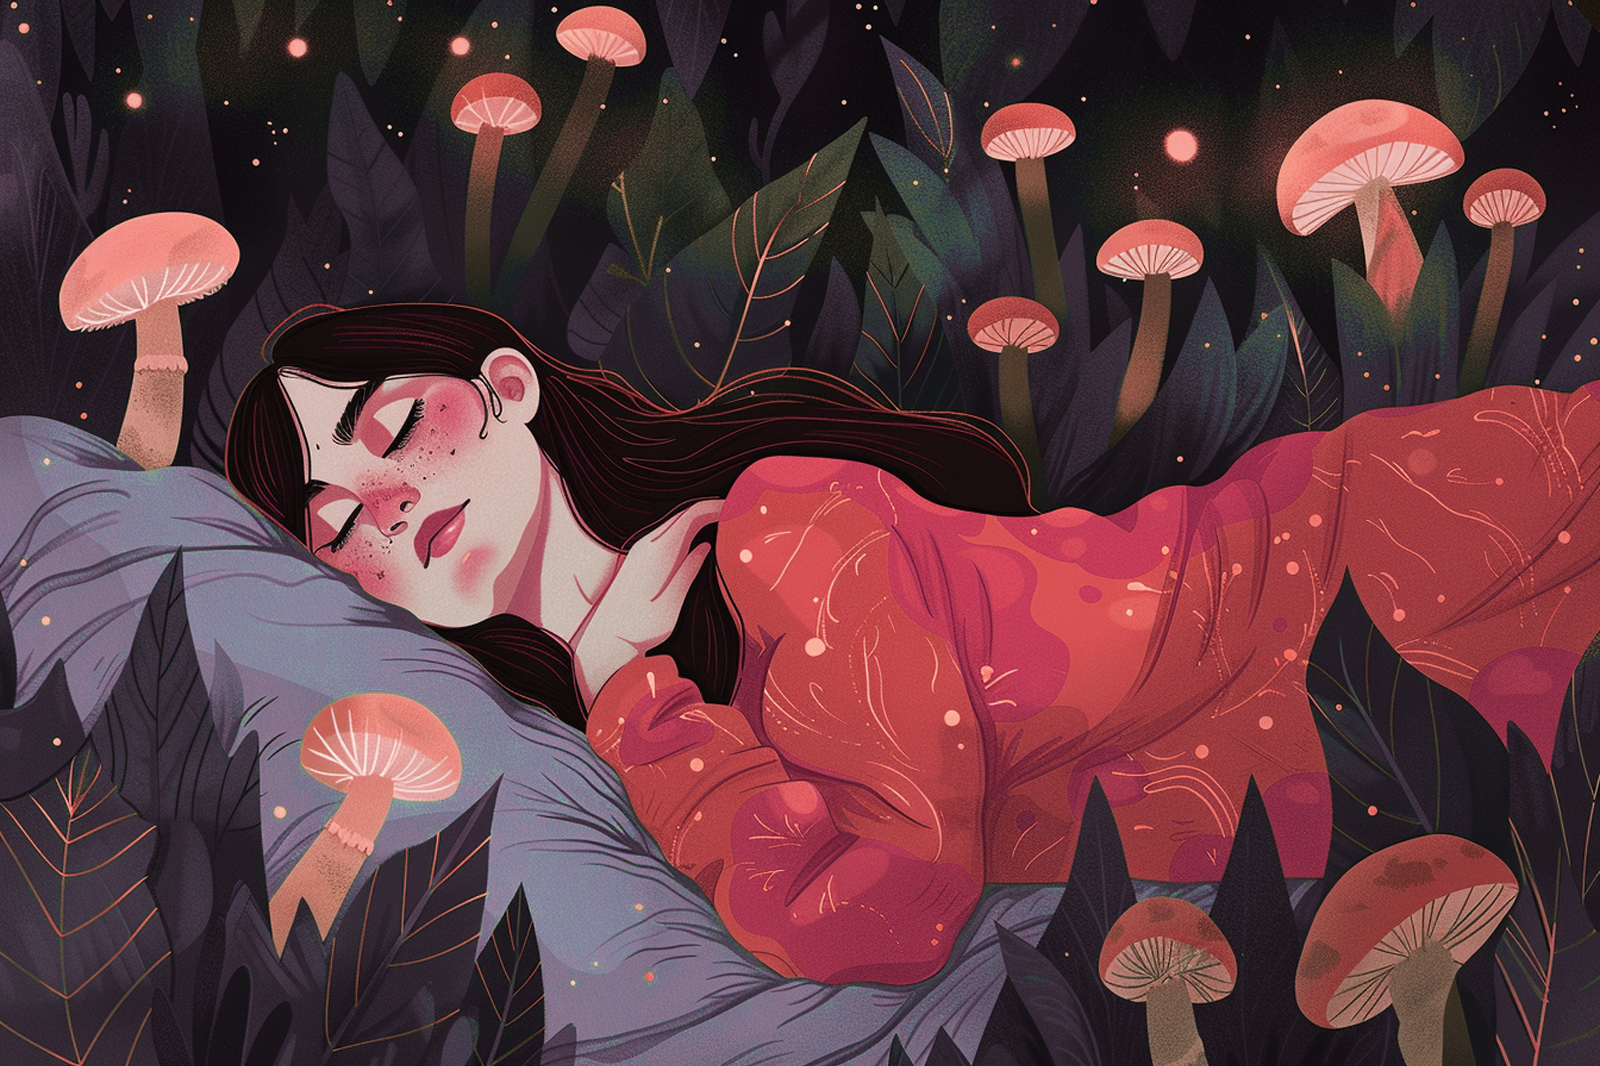 Woman dreaming of sleeping in jungle surrounded by floating pink mushrooms